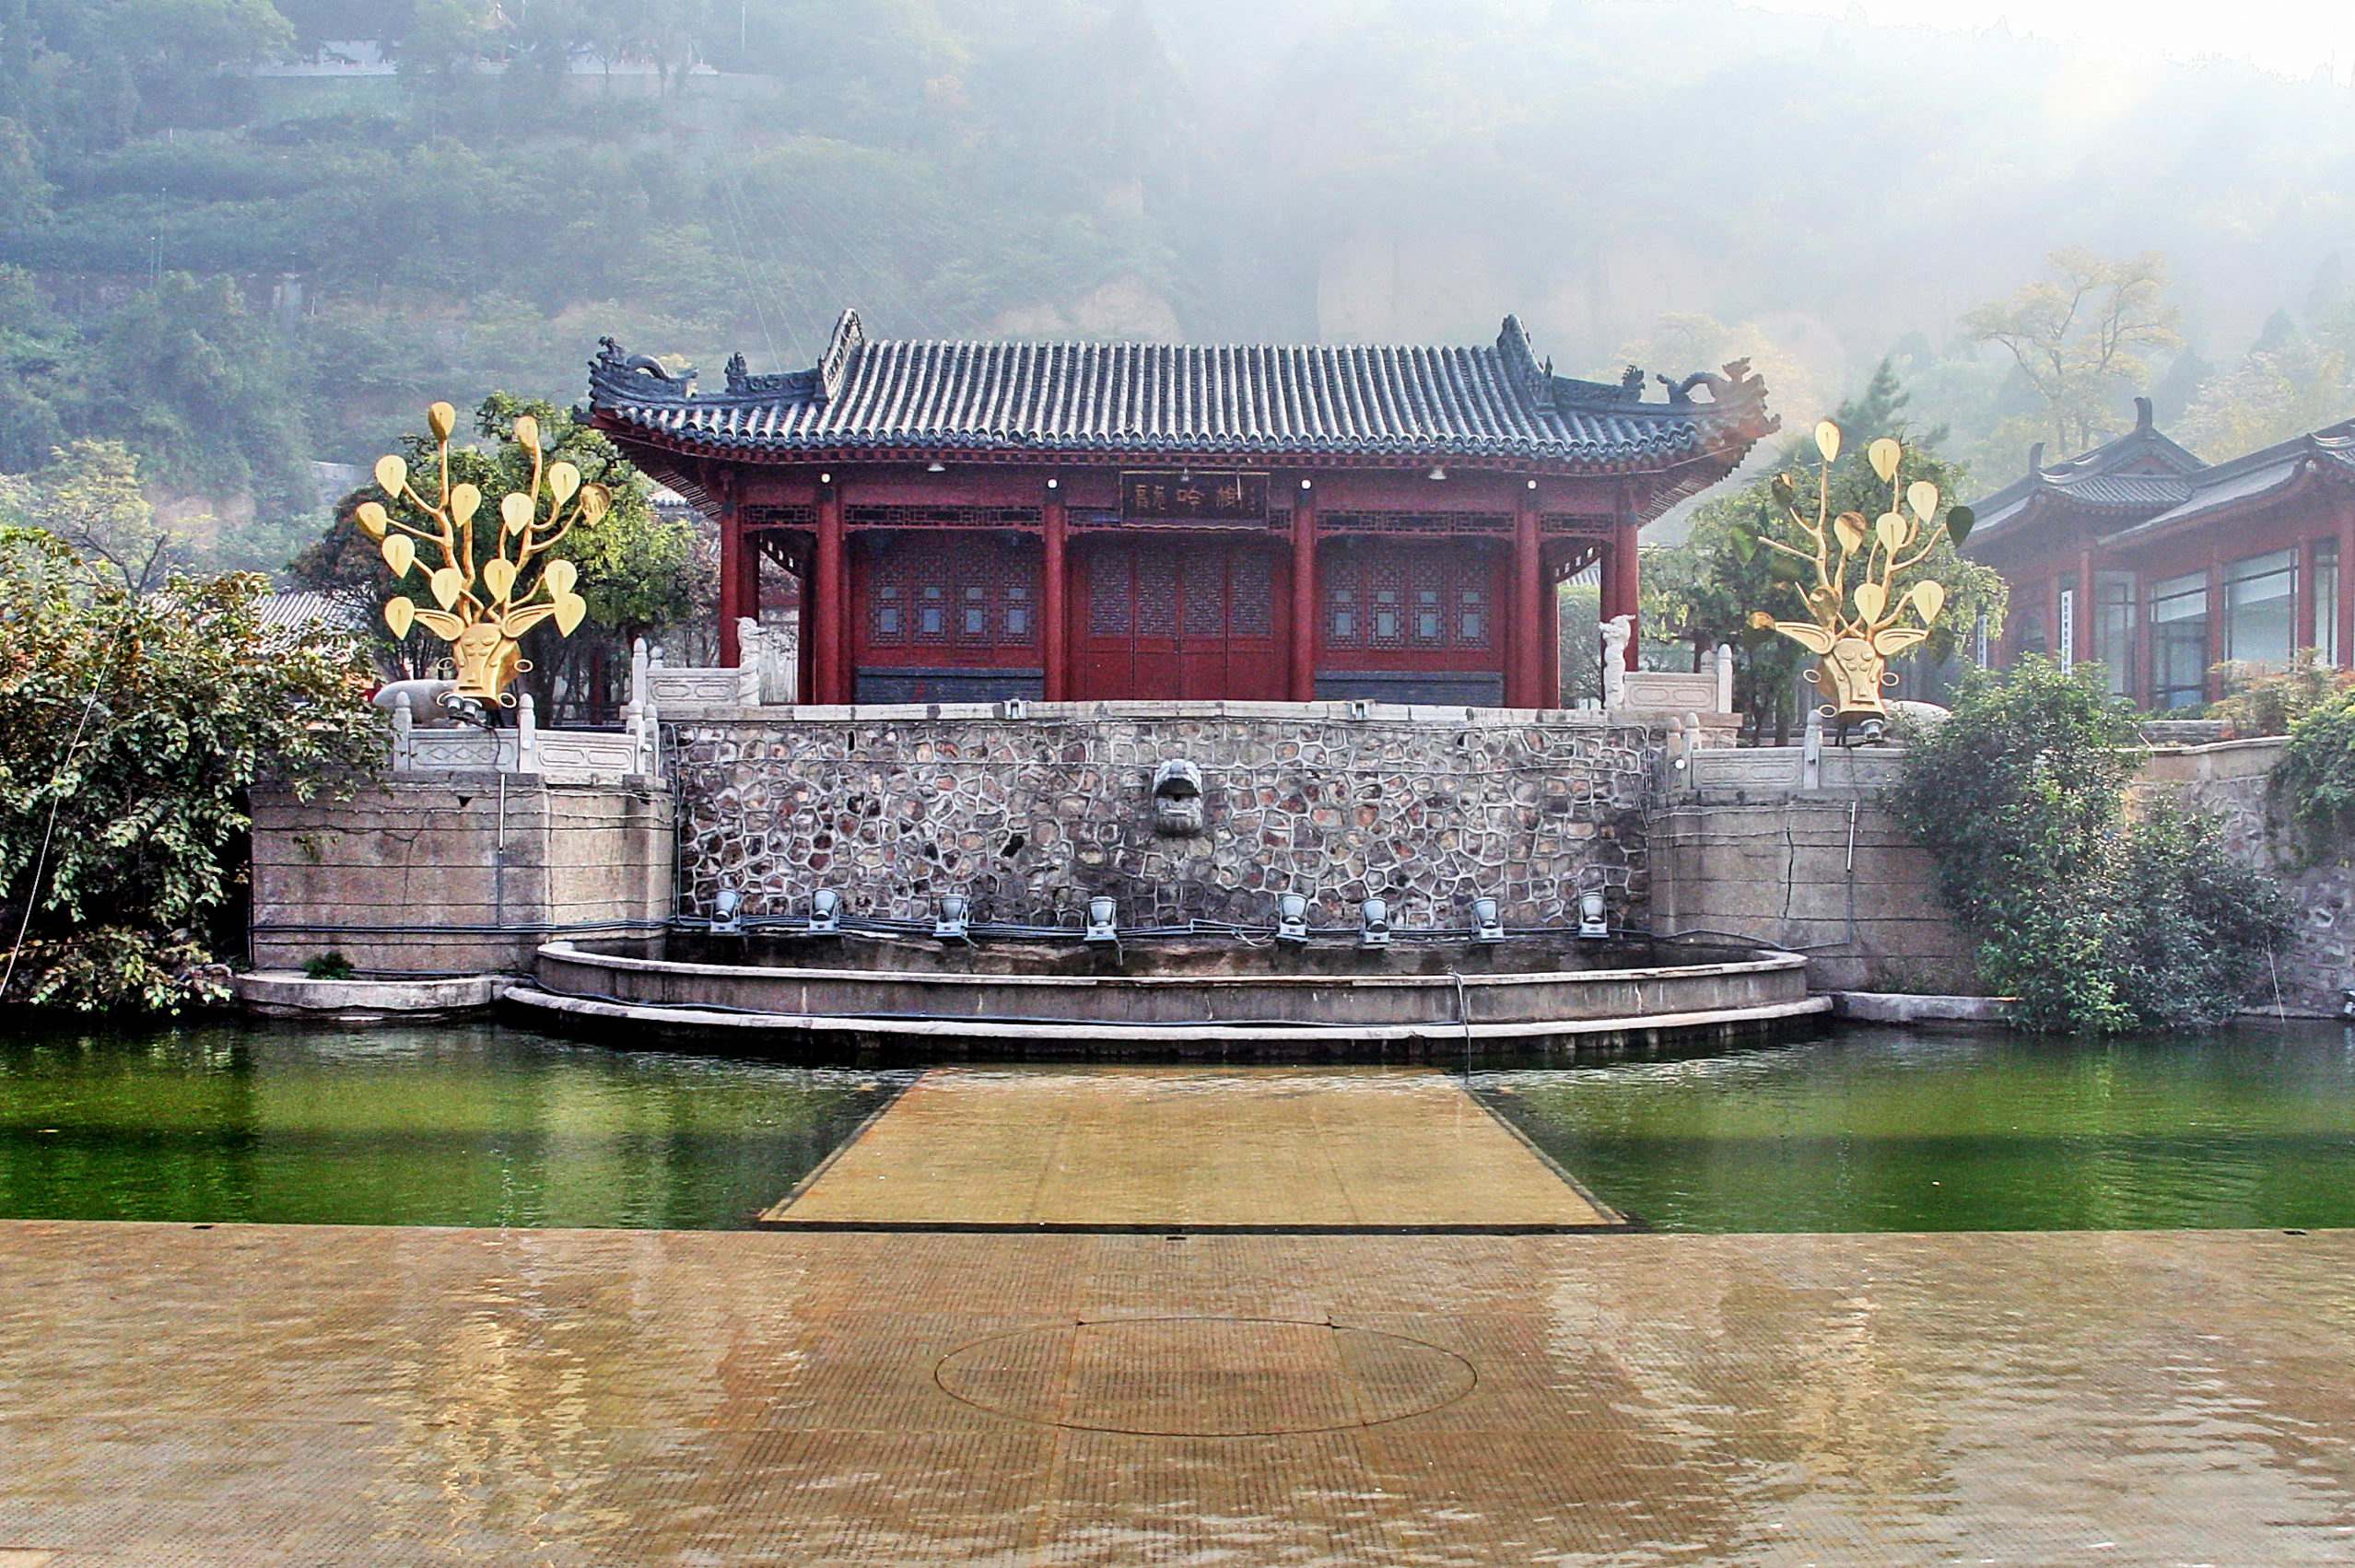 Huaqing Pool has long history and location among the wonderful landscapes of Xian should entice any visitor to visit and bathe in this hot spring.